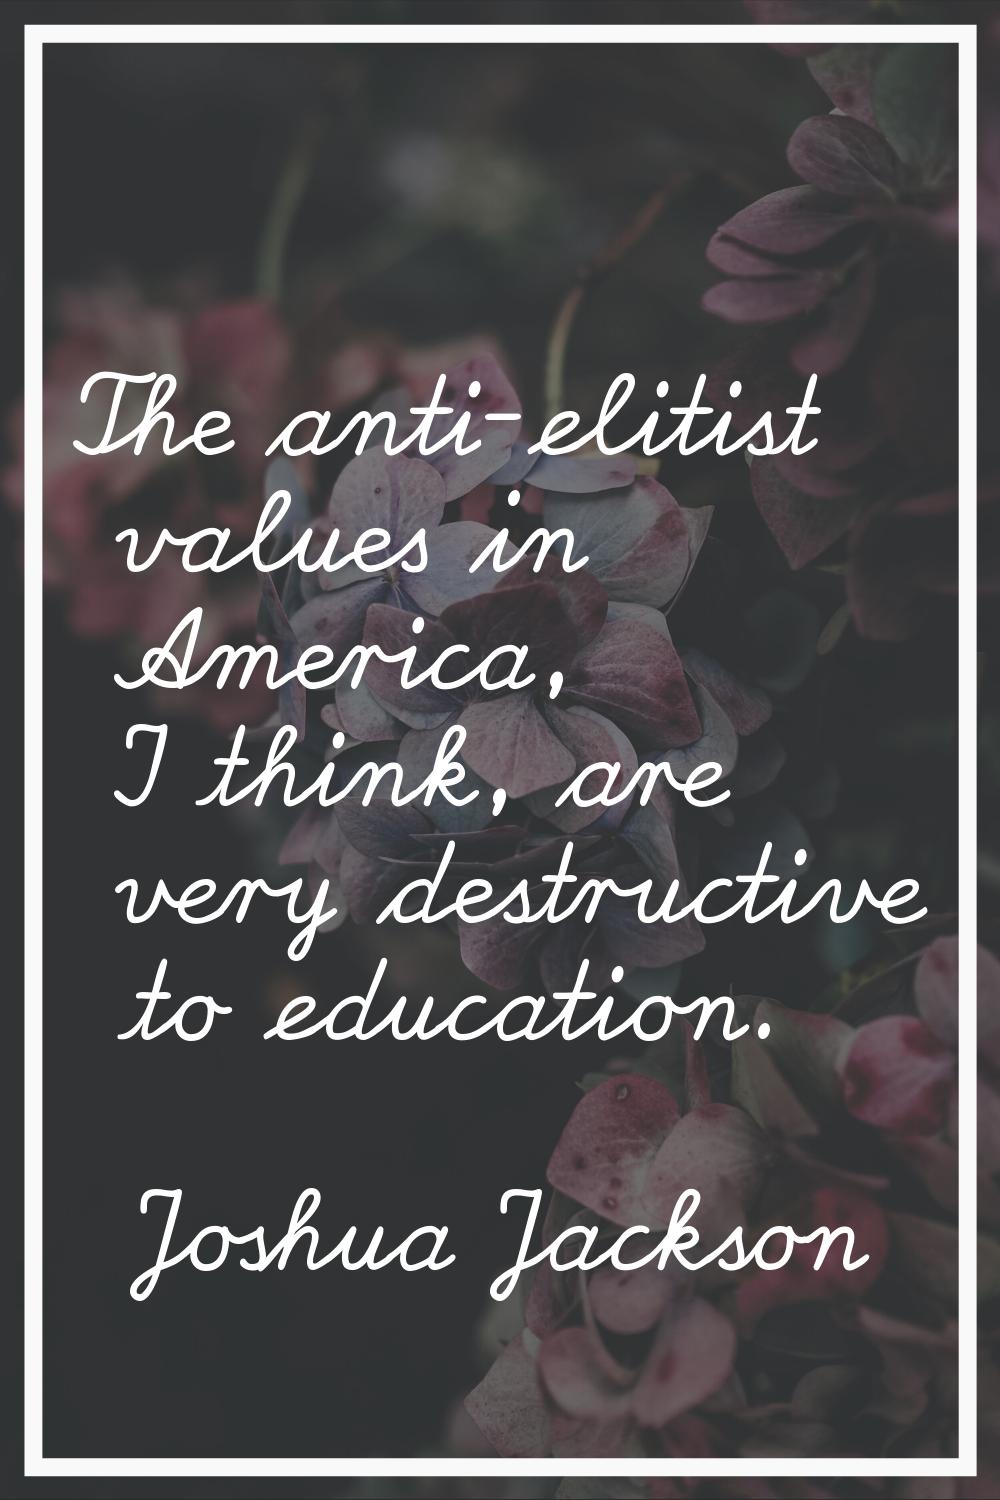 The anti-elitist values in America, I think, are very destructive to education.